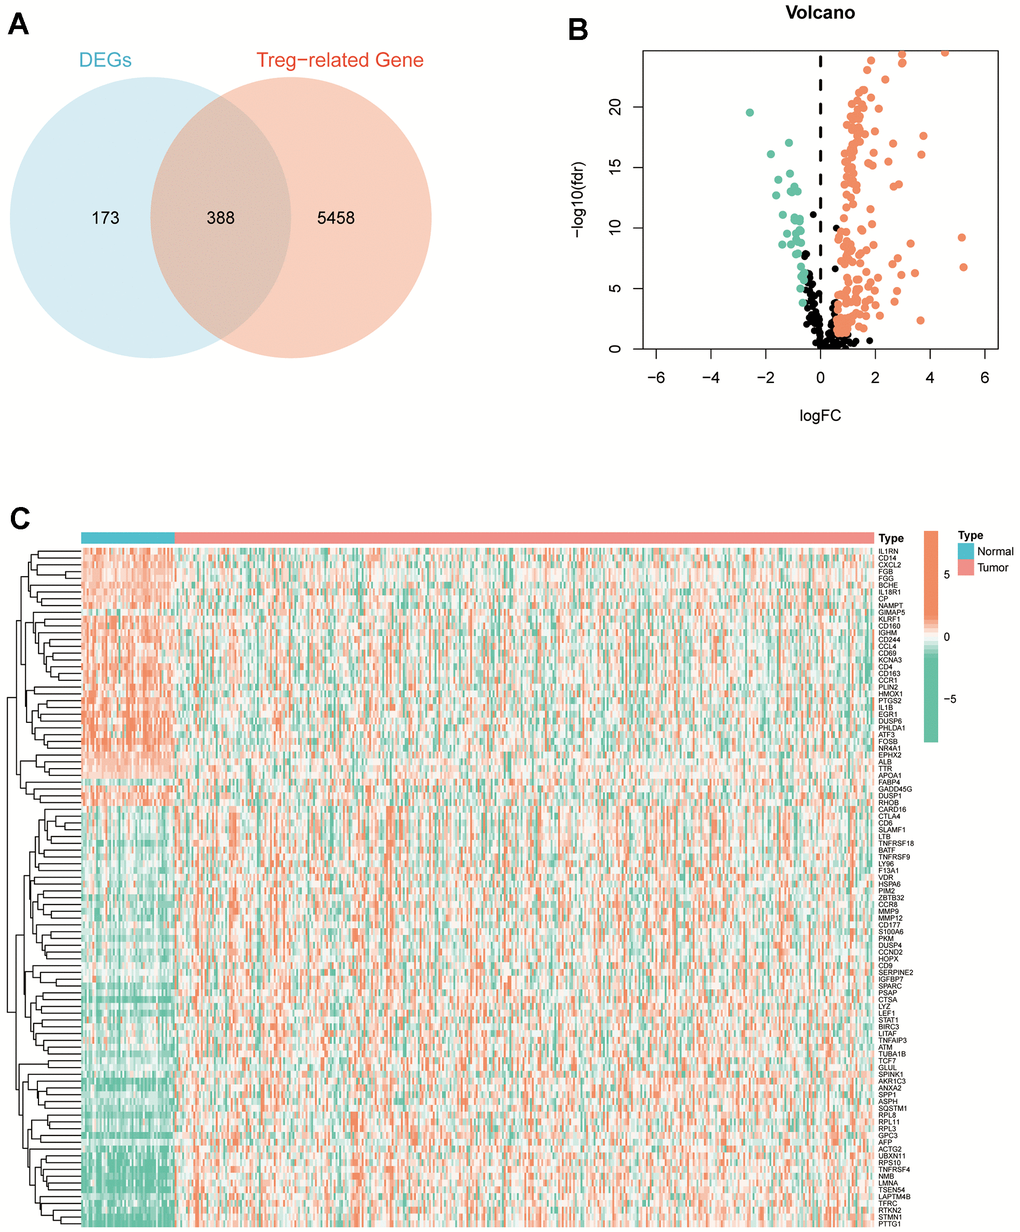 Identification of DETGs. (A) Intersected 5846 TRGs with the 561 DEGs to obtain 388 DETGs. (B) The volcano plot demonstrated 388 differentially expressed DETGs in HCC tumour and normal tissues. (C) The heatmap demonstrated the expression of 100 differentially expressed DETGs in HCC tumour and normal tissues.